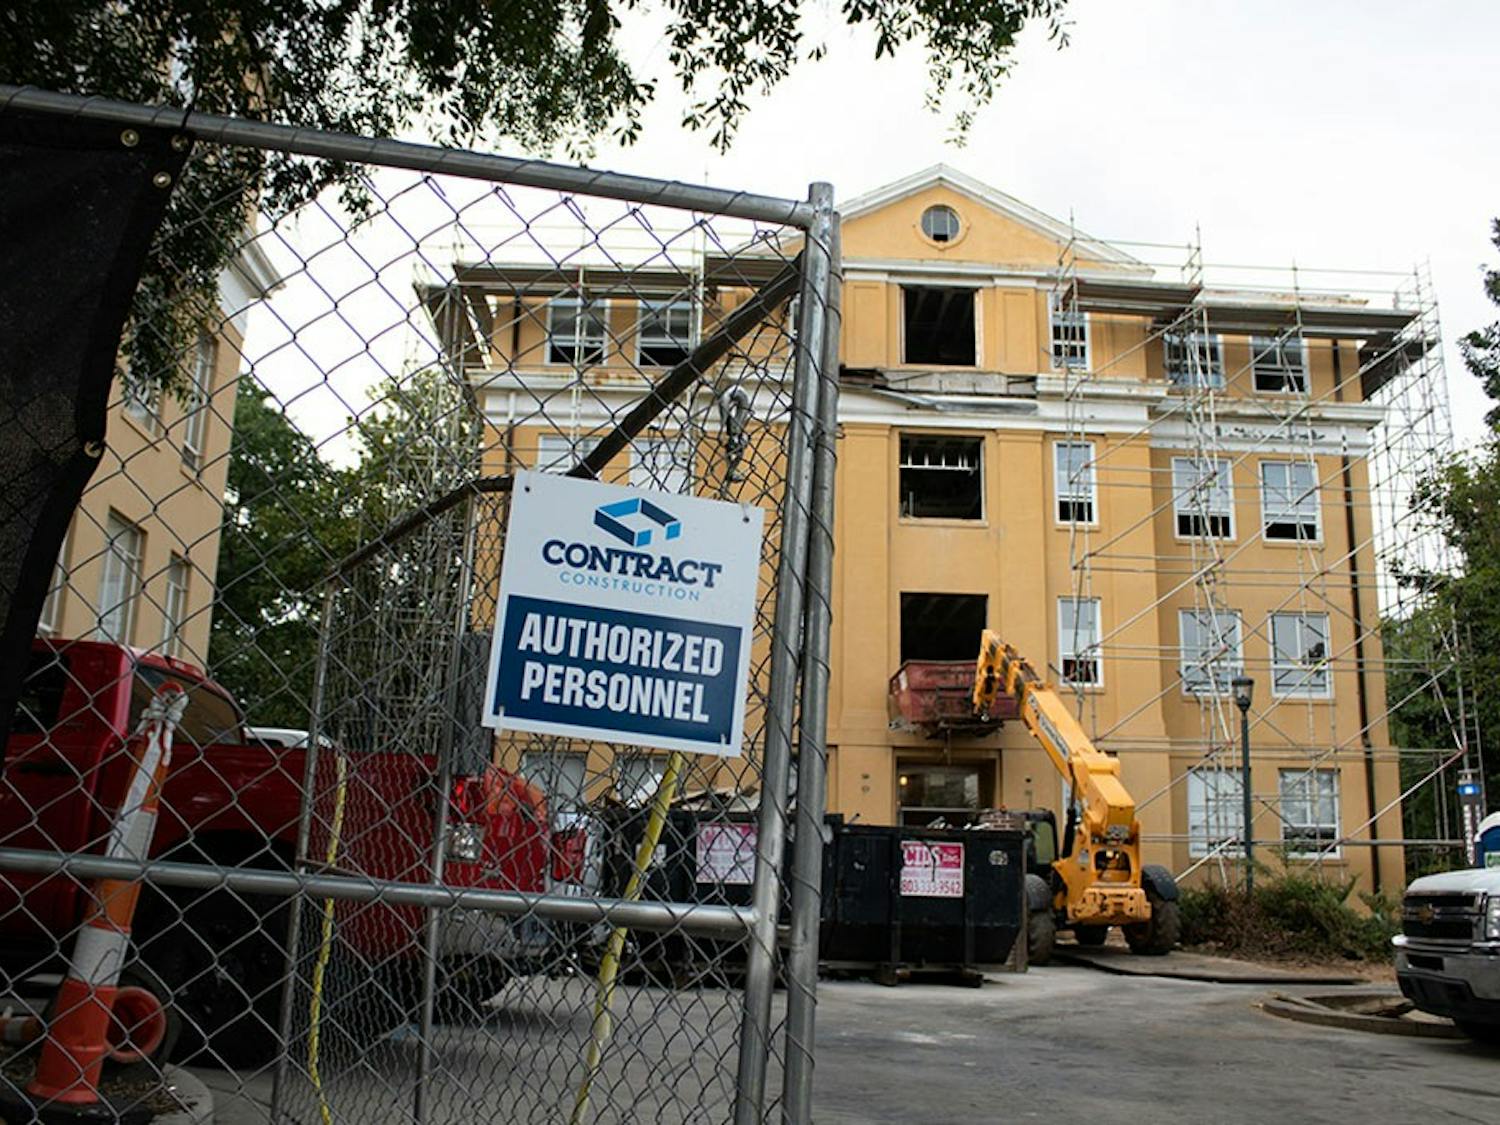 LeConte College, the center of the Mathematics and Statistics Department that is in the midst of a $20 million renovation that is projected to end in 2022. Renovation plans include installing a HVAC system, a new sprinkler system, replacing plumbing, replacing the electrical system and making the building more structurally sound and accessible.&nbsp;